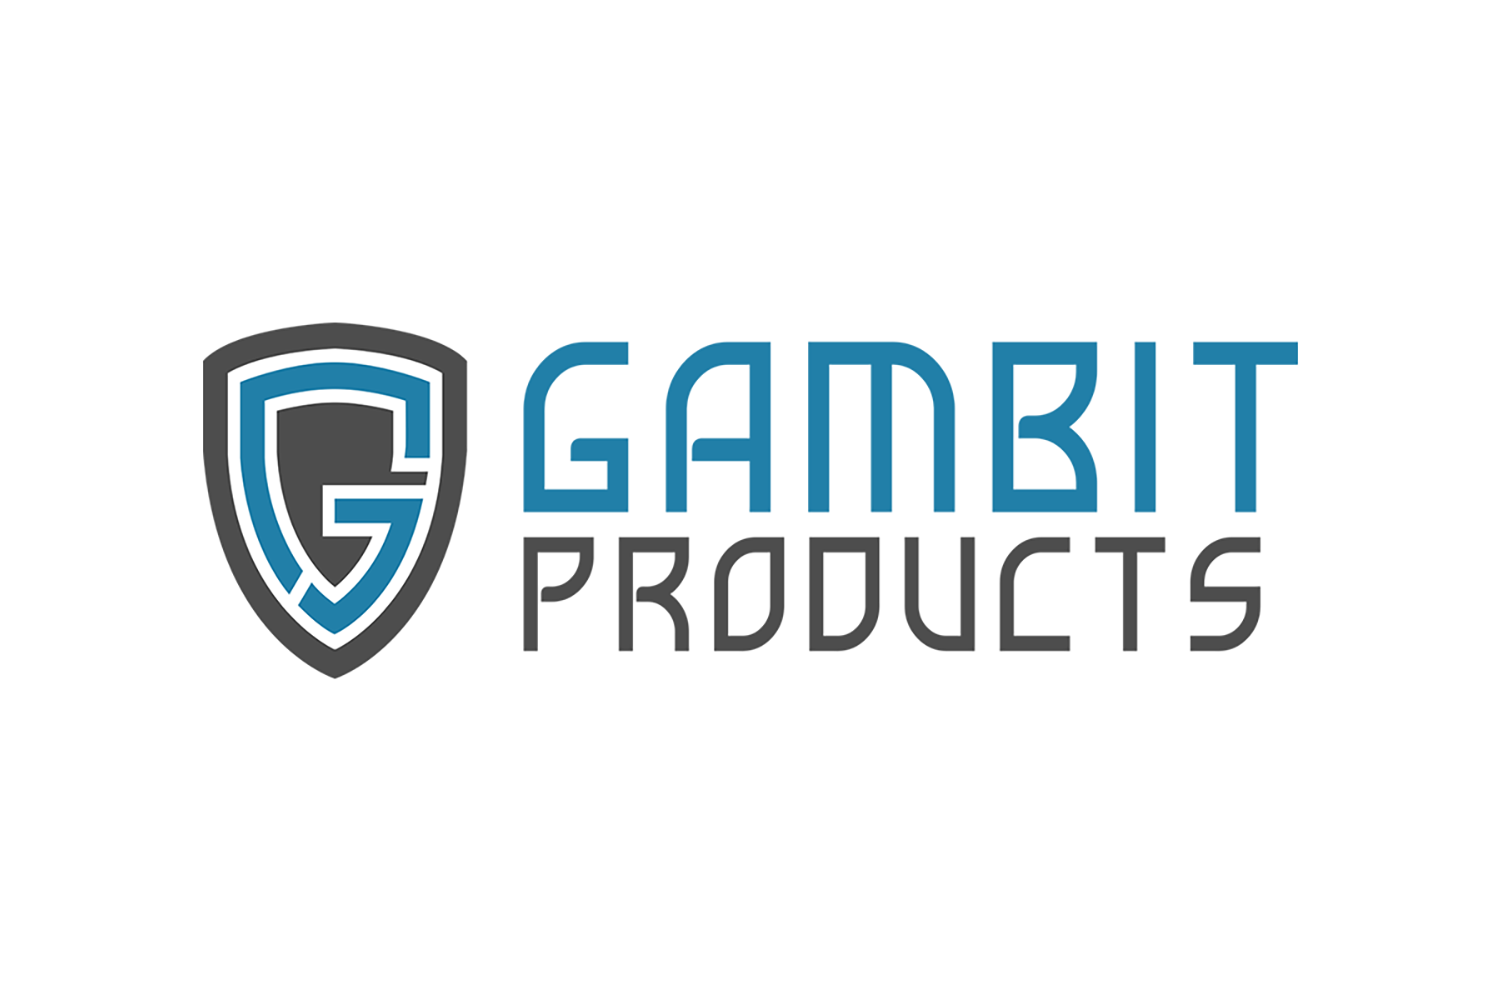 The official logo of Gambit Products of East Liverpool, Ohio.